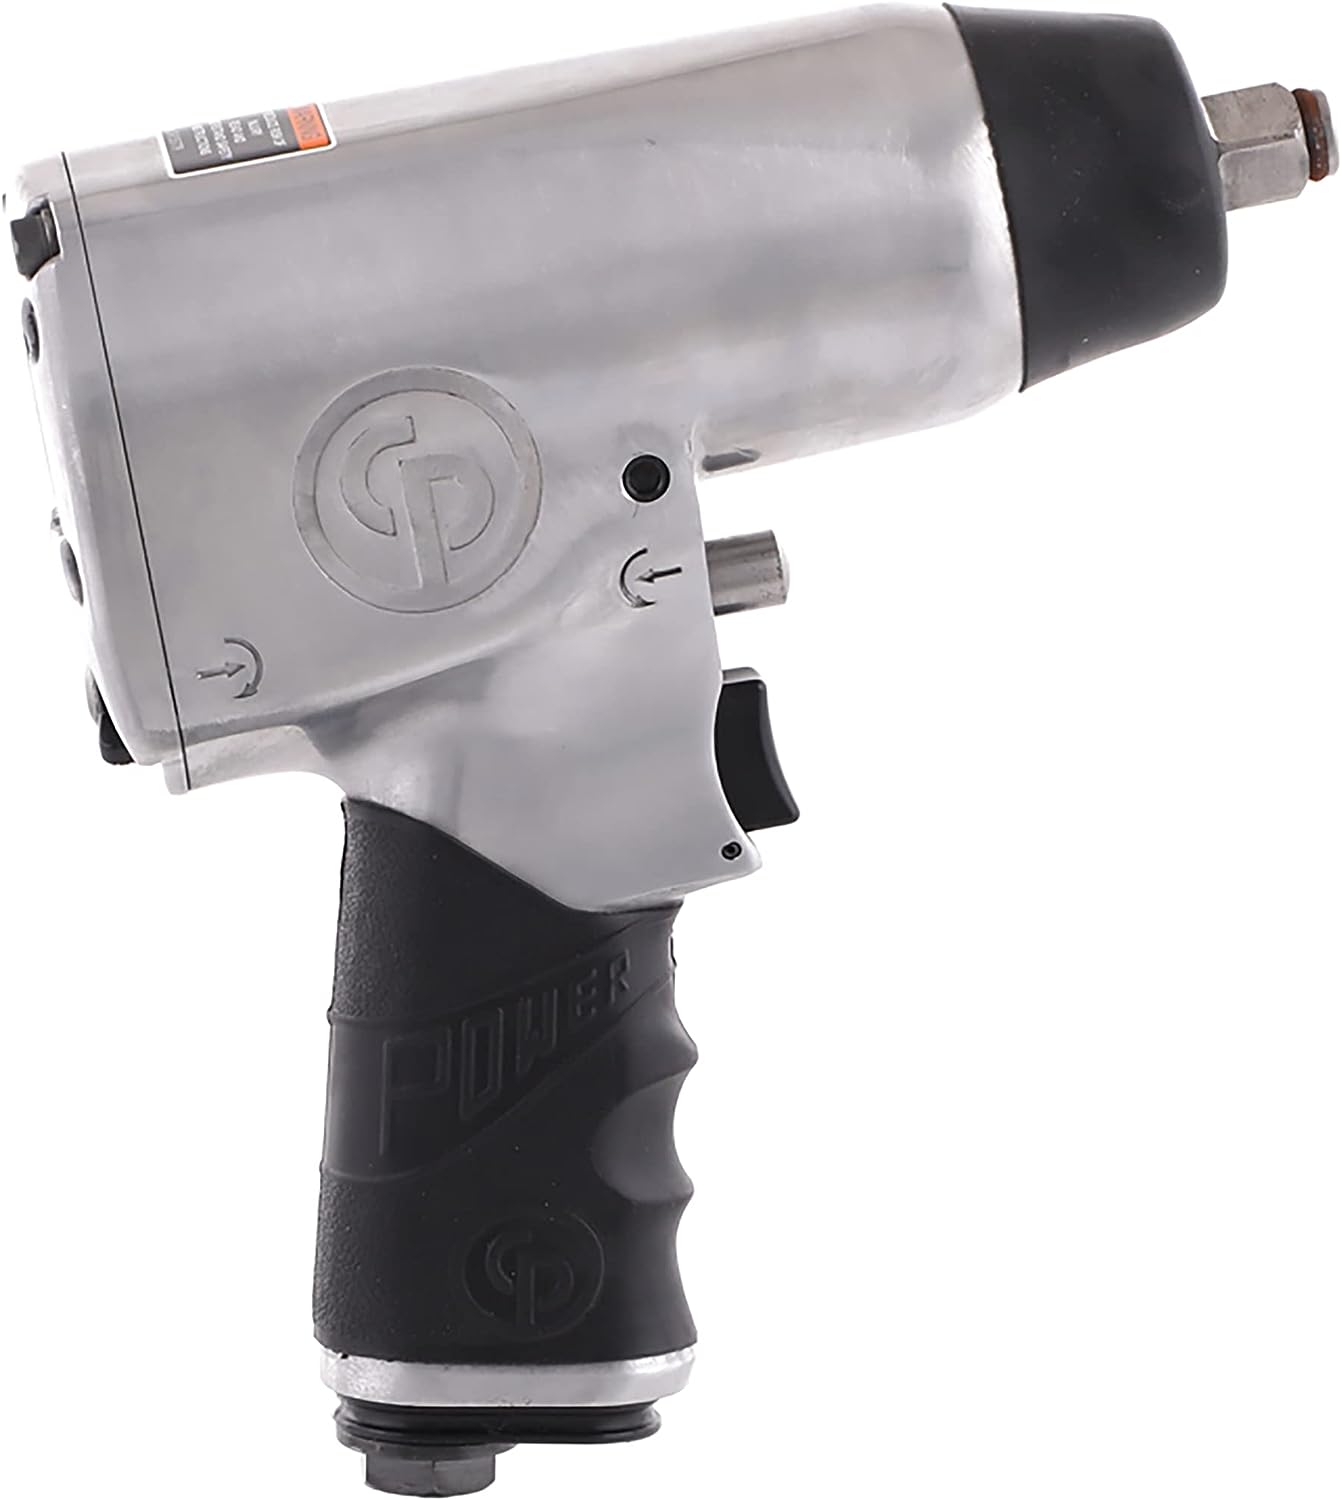 Chicago Pneumatic 1/2" Drive Heavy Duty Air Impact Wrench 1